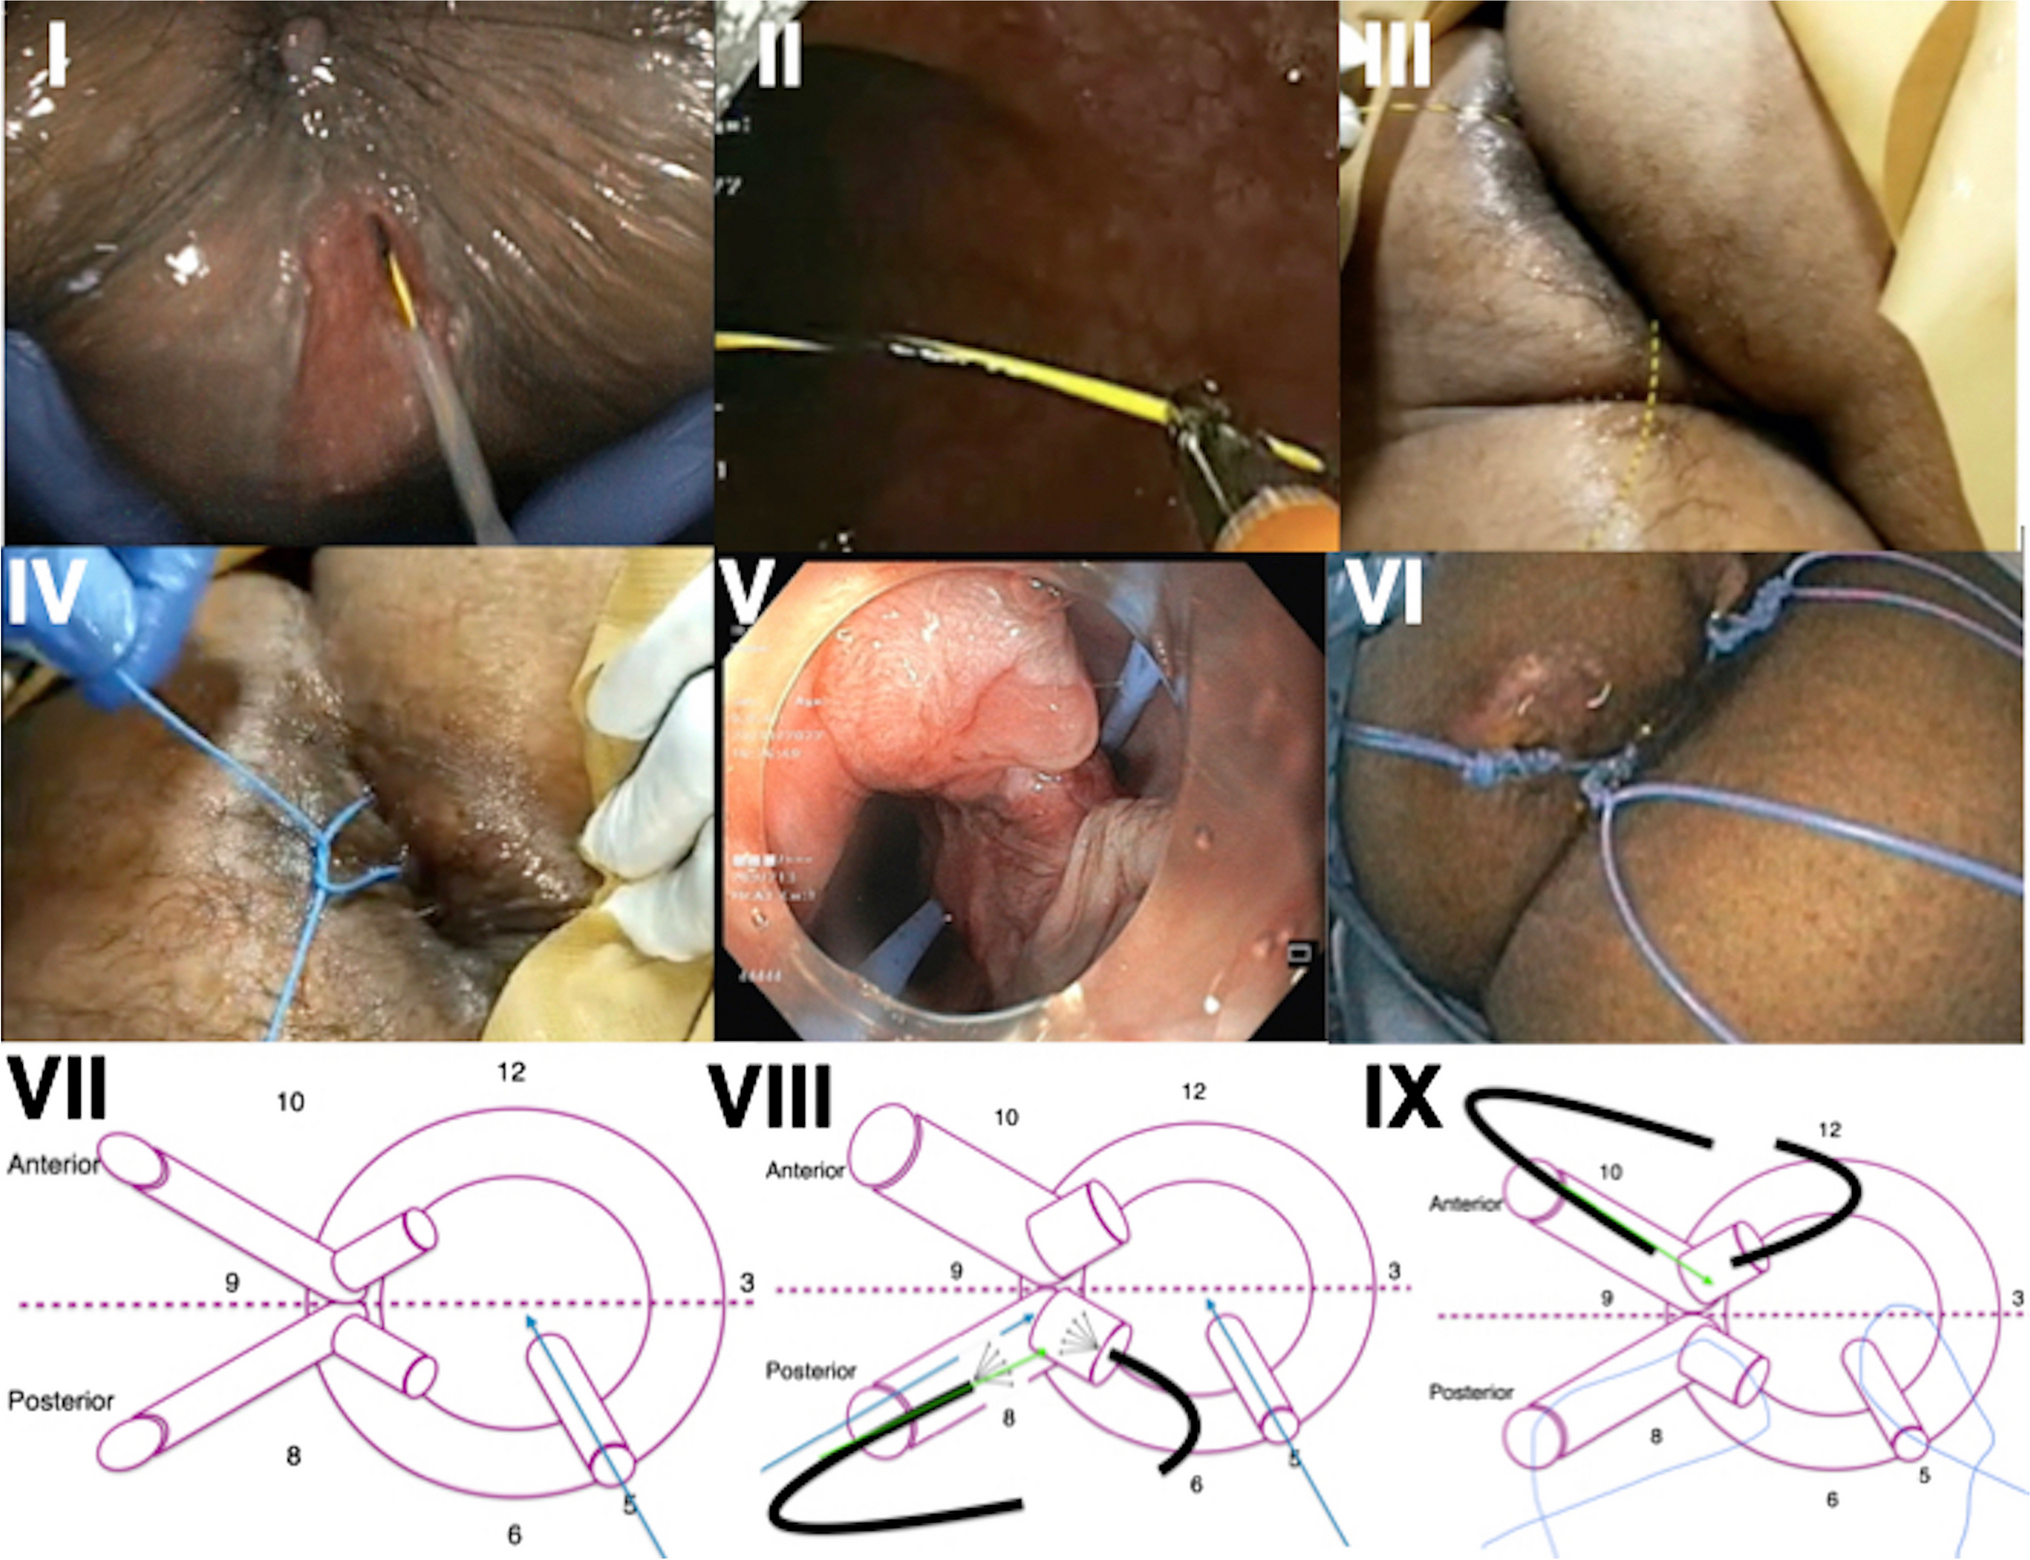 Endoscopic seton placement for inflammatory bowel disease (IBD) and non-IBD, simple or complex fistula: A pilot prospective study (with video)